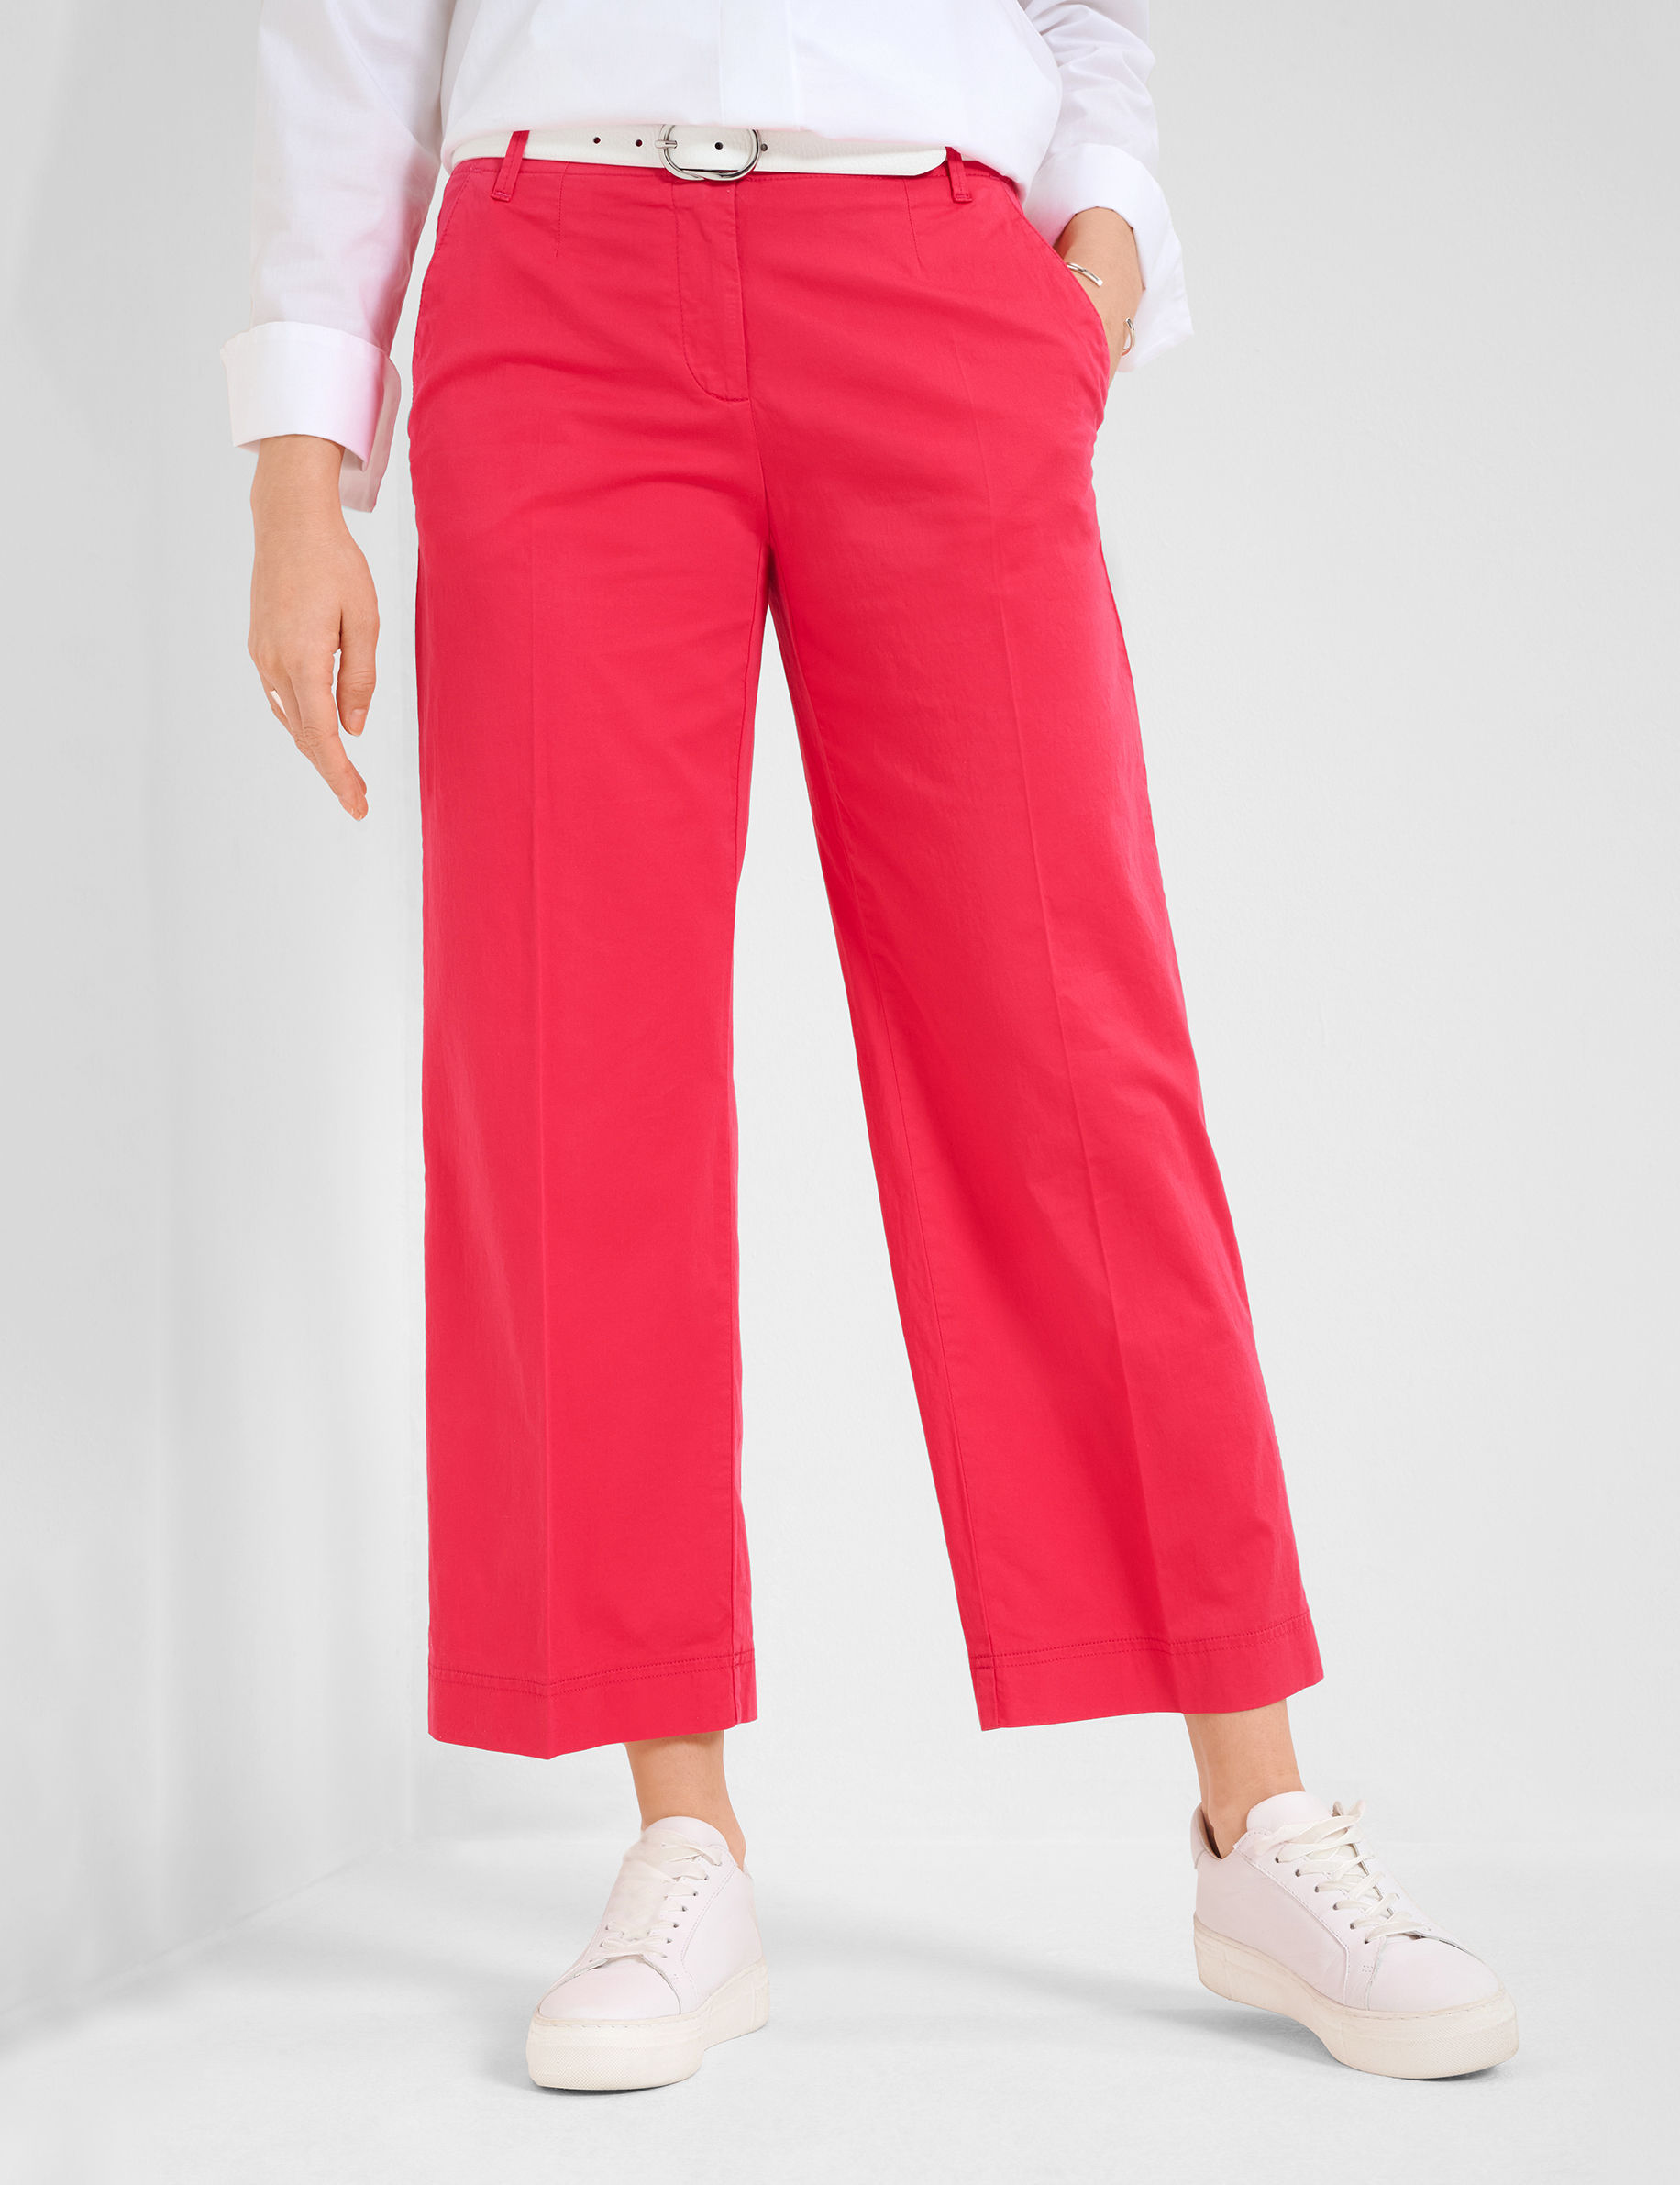 Shades of pink, Women, WIDE LEG, Style MAINE S, MODEL_FRONT_ISHOP